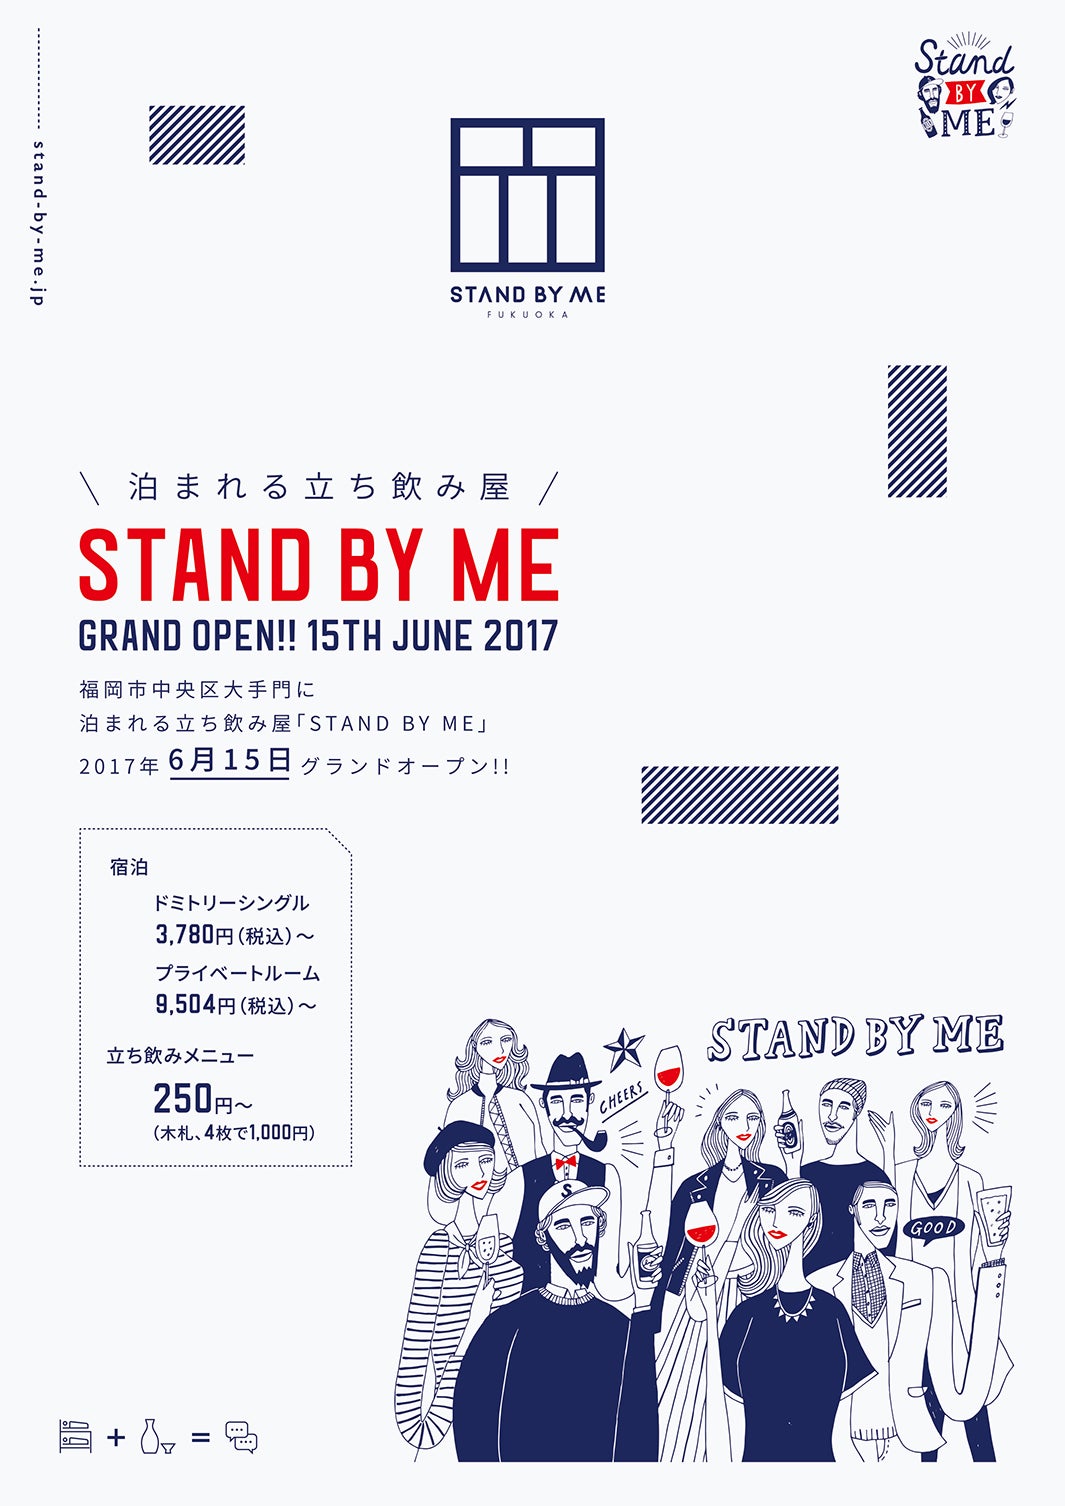 STAND BY ME／画像提供：STAND BY ME